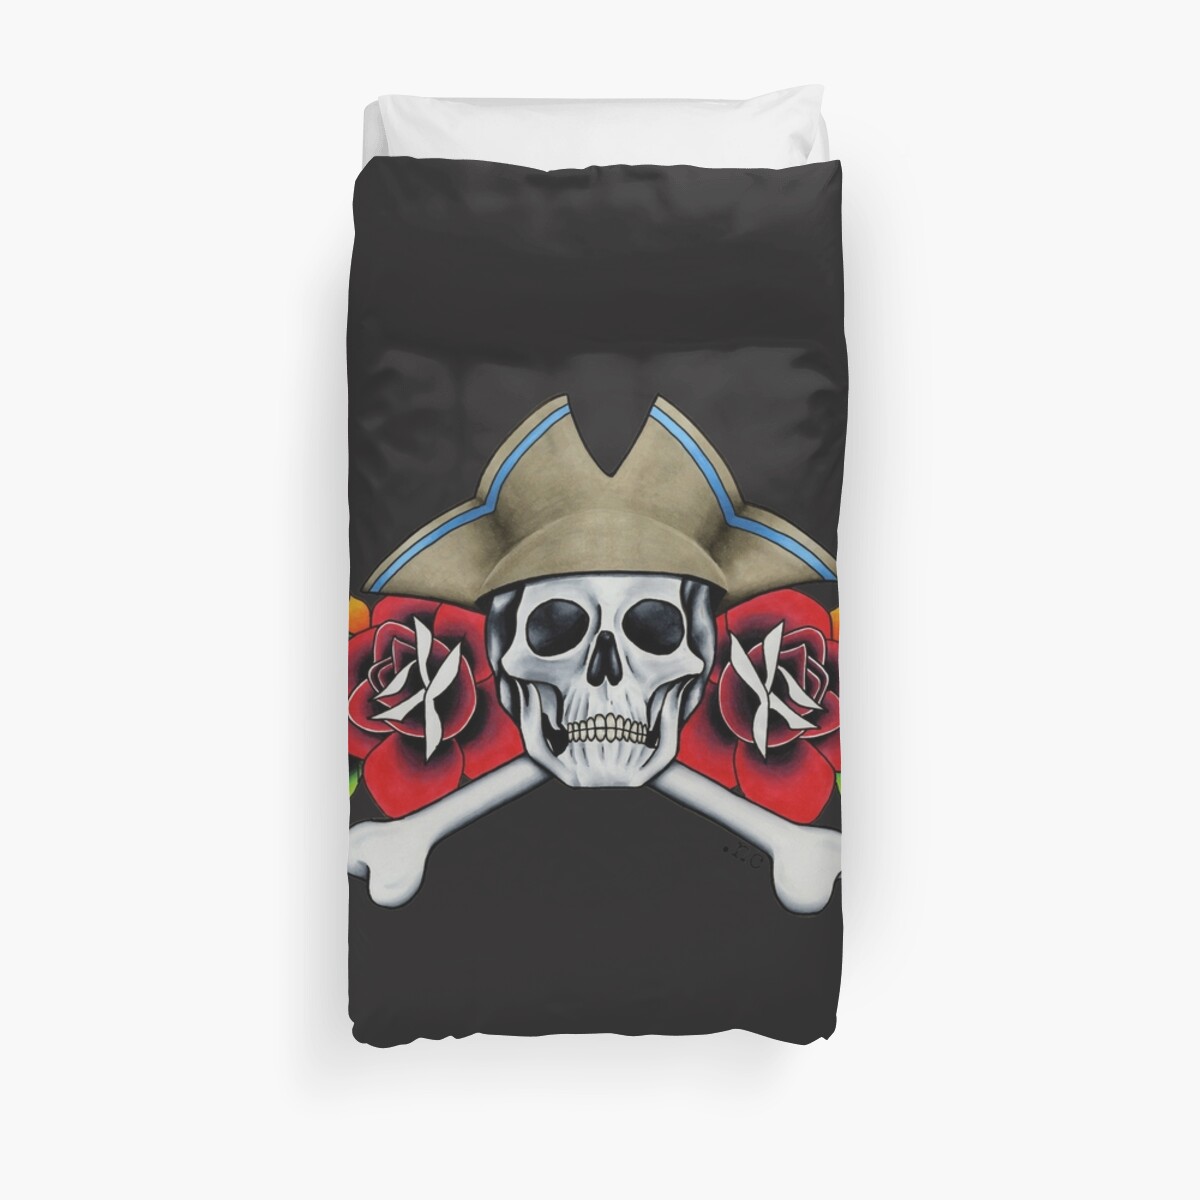 Pirate Skull Tattoo Duvet Cover By Napiks Redbubble